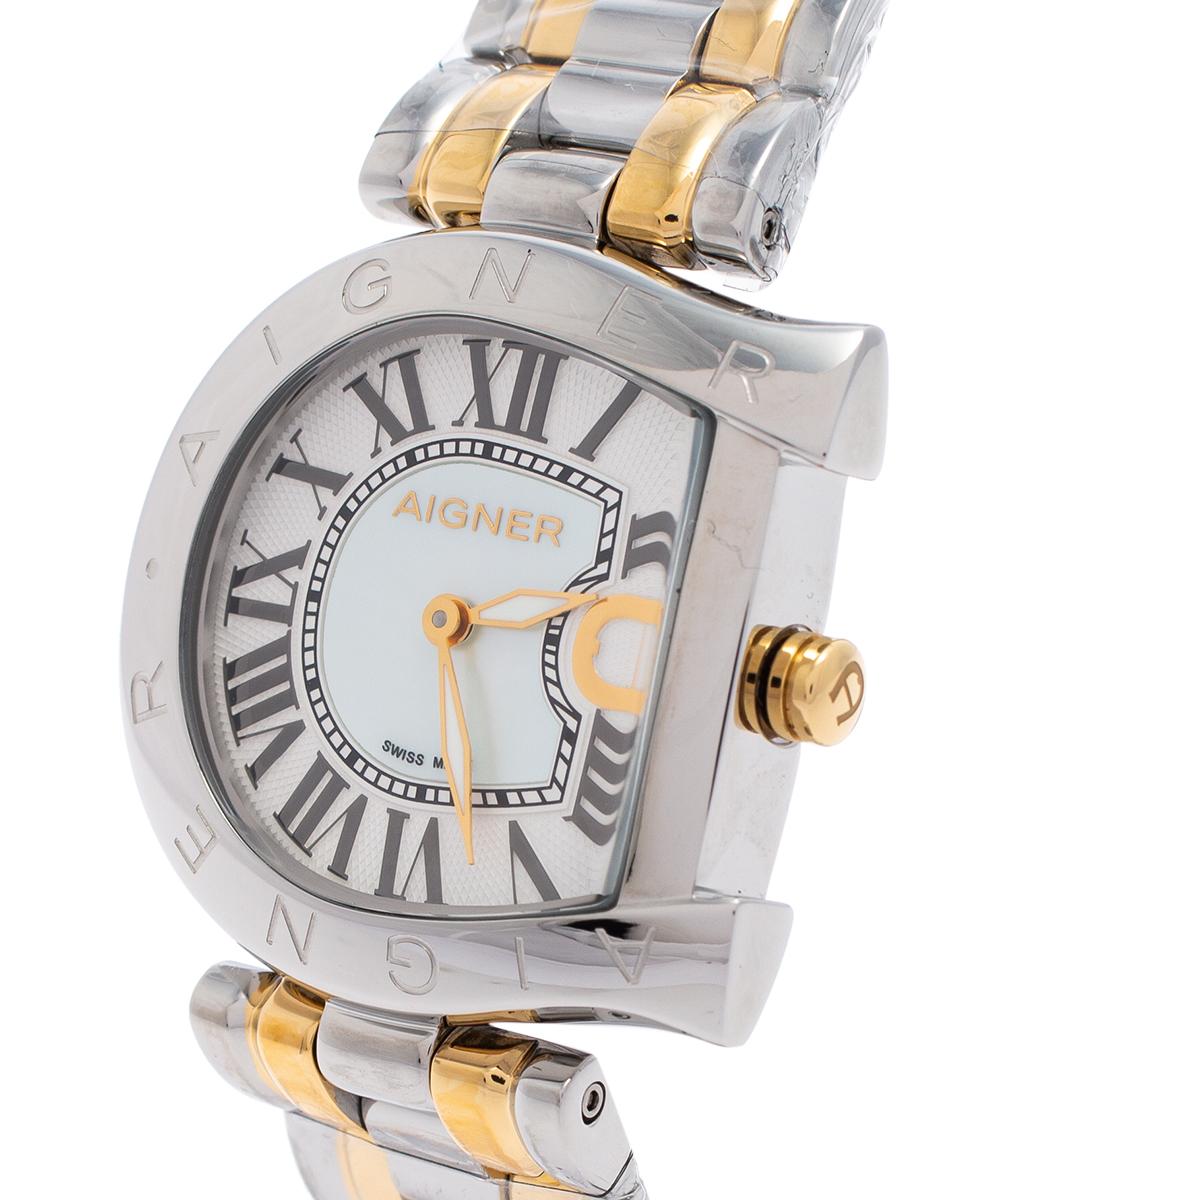 This Aigner wristwatch is a statement of luxury. This watch belongs to the brand's Arco collection. Constructed in two-tone stainless steel, this watch features a mother of pearl dial set with hour markers and a logo-shaped bezel. It has a quartz